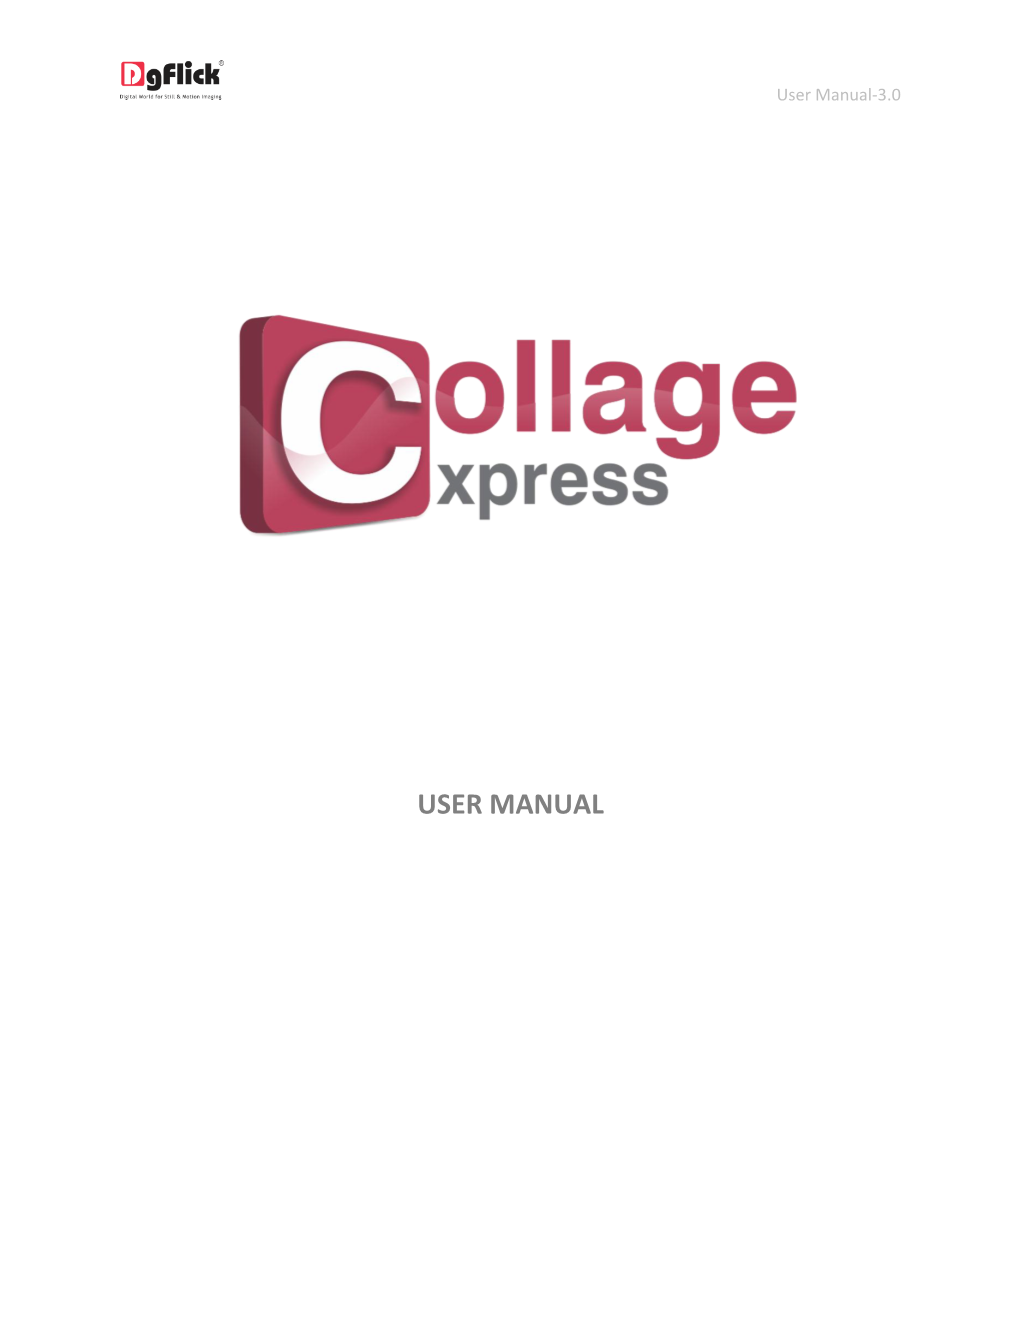 Collage Xpress User Manual CONTENTS